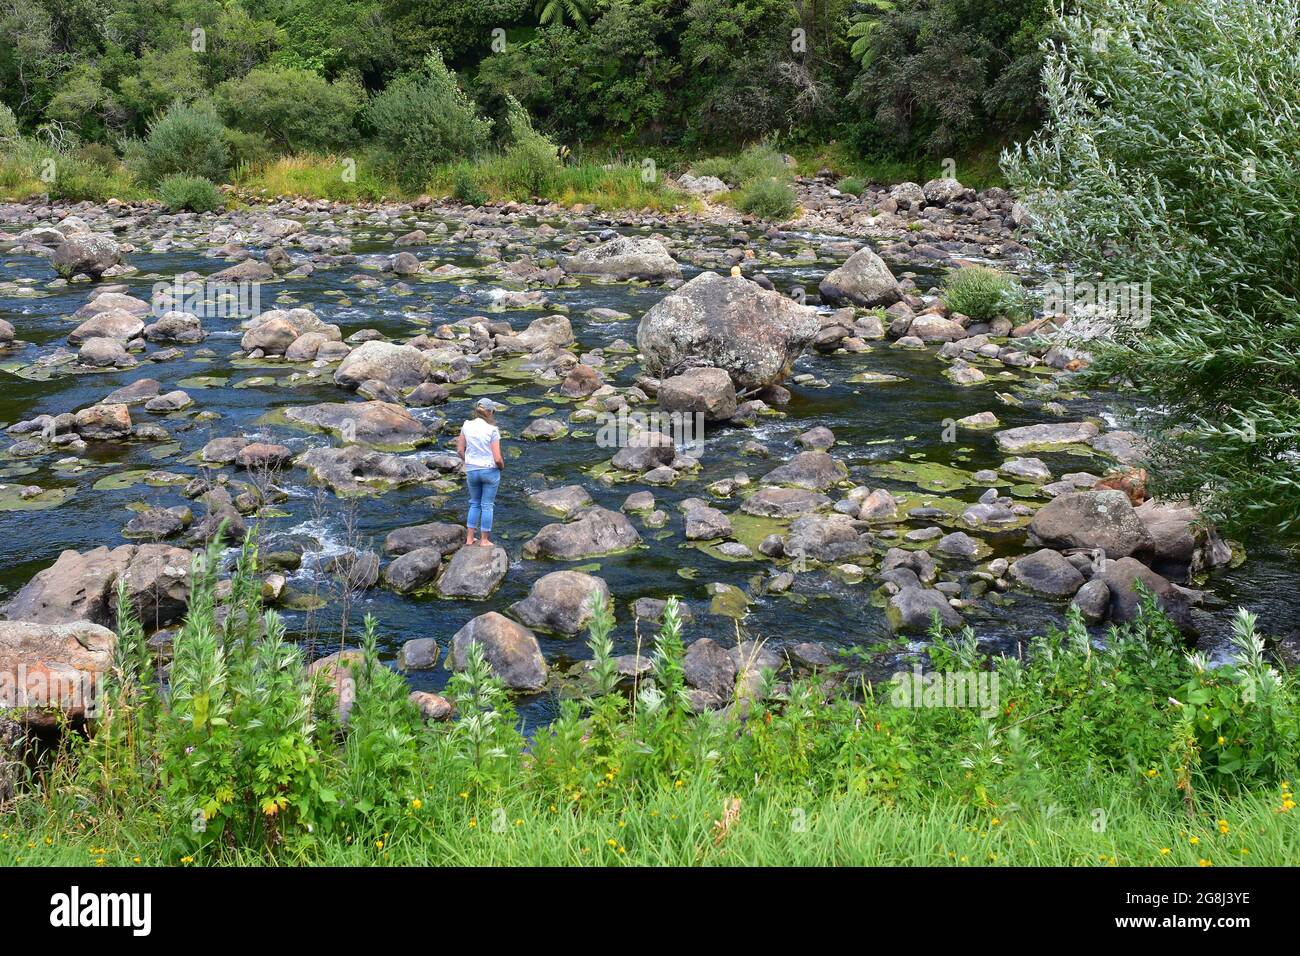 Female standing on one of many boulders in shallow river with a lot of algae growth. Stock Photo